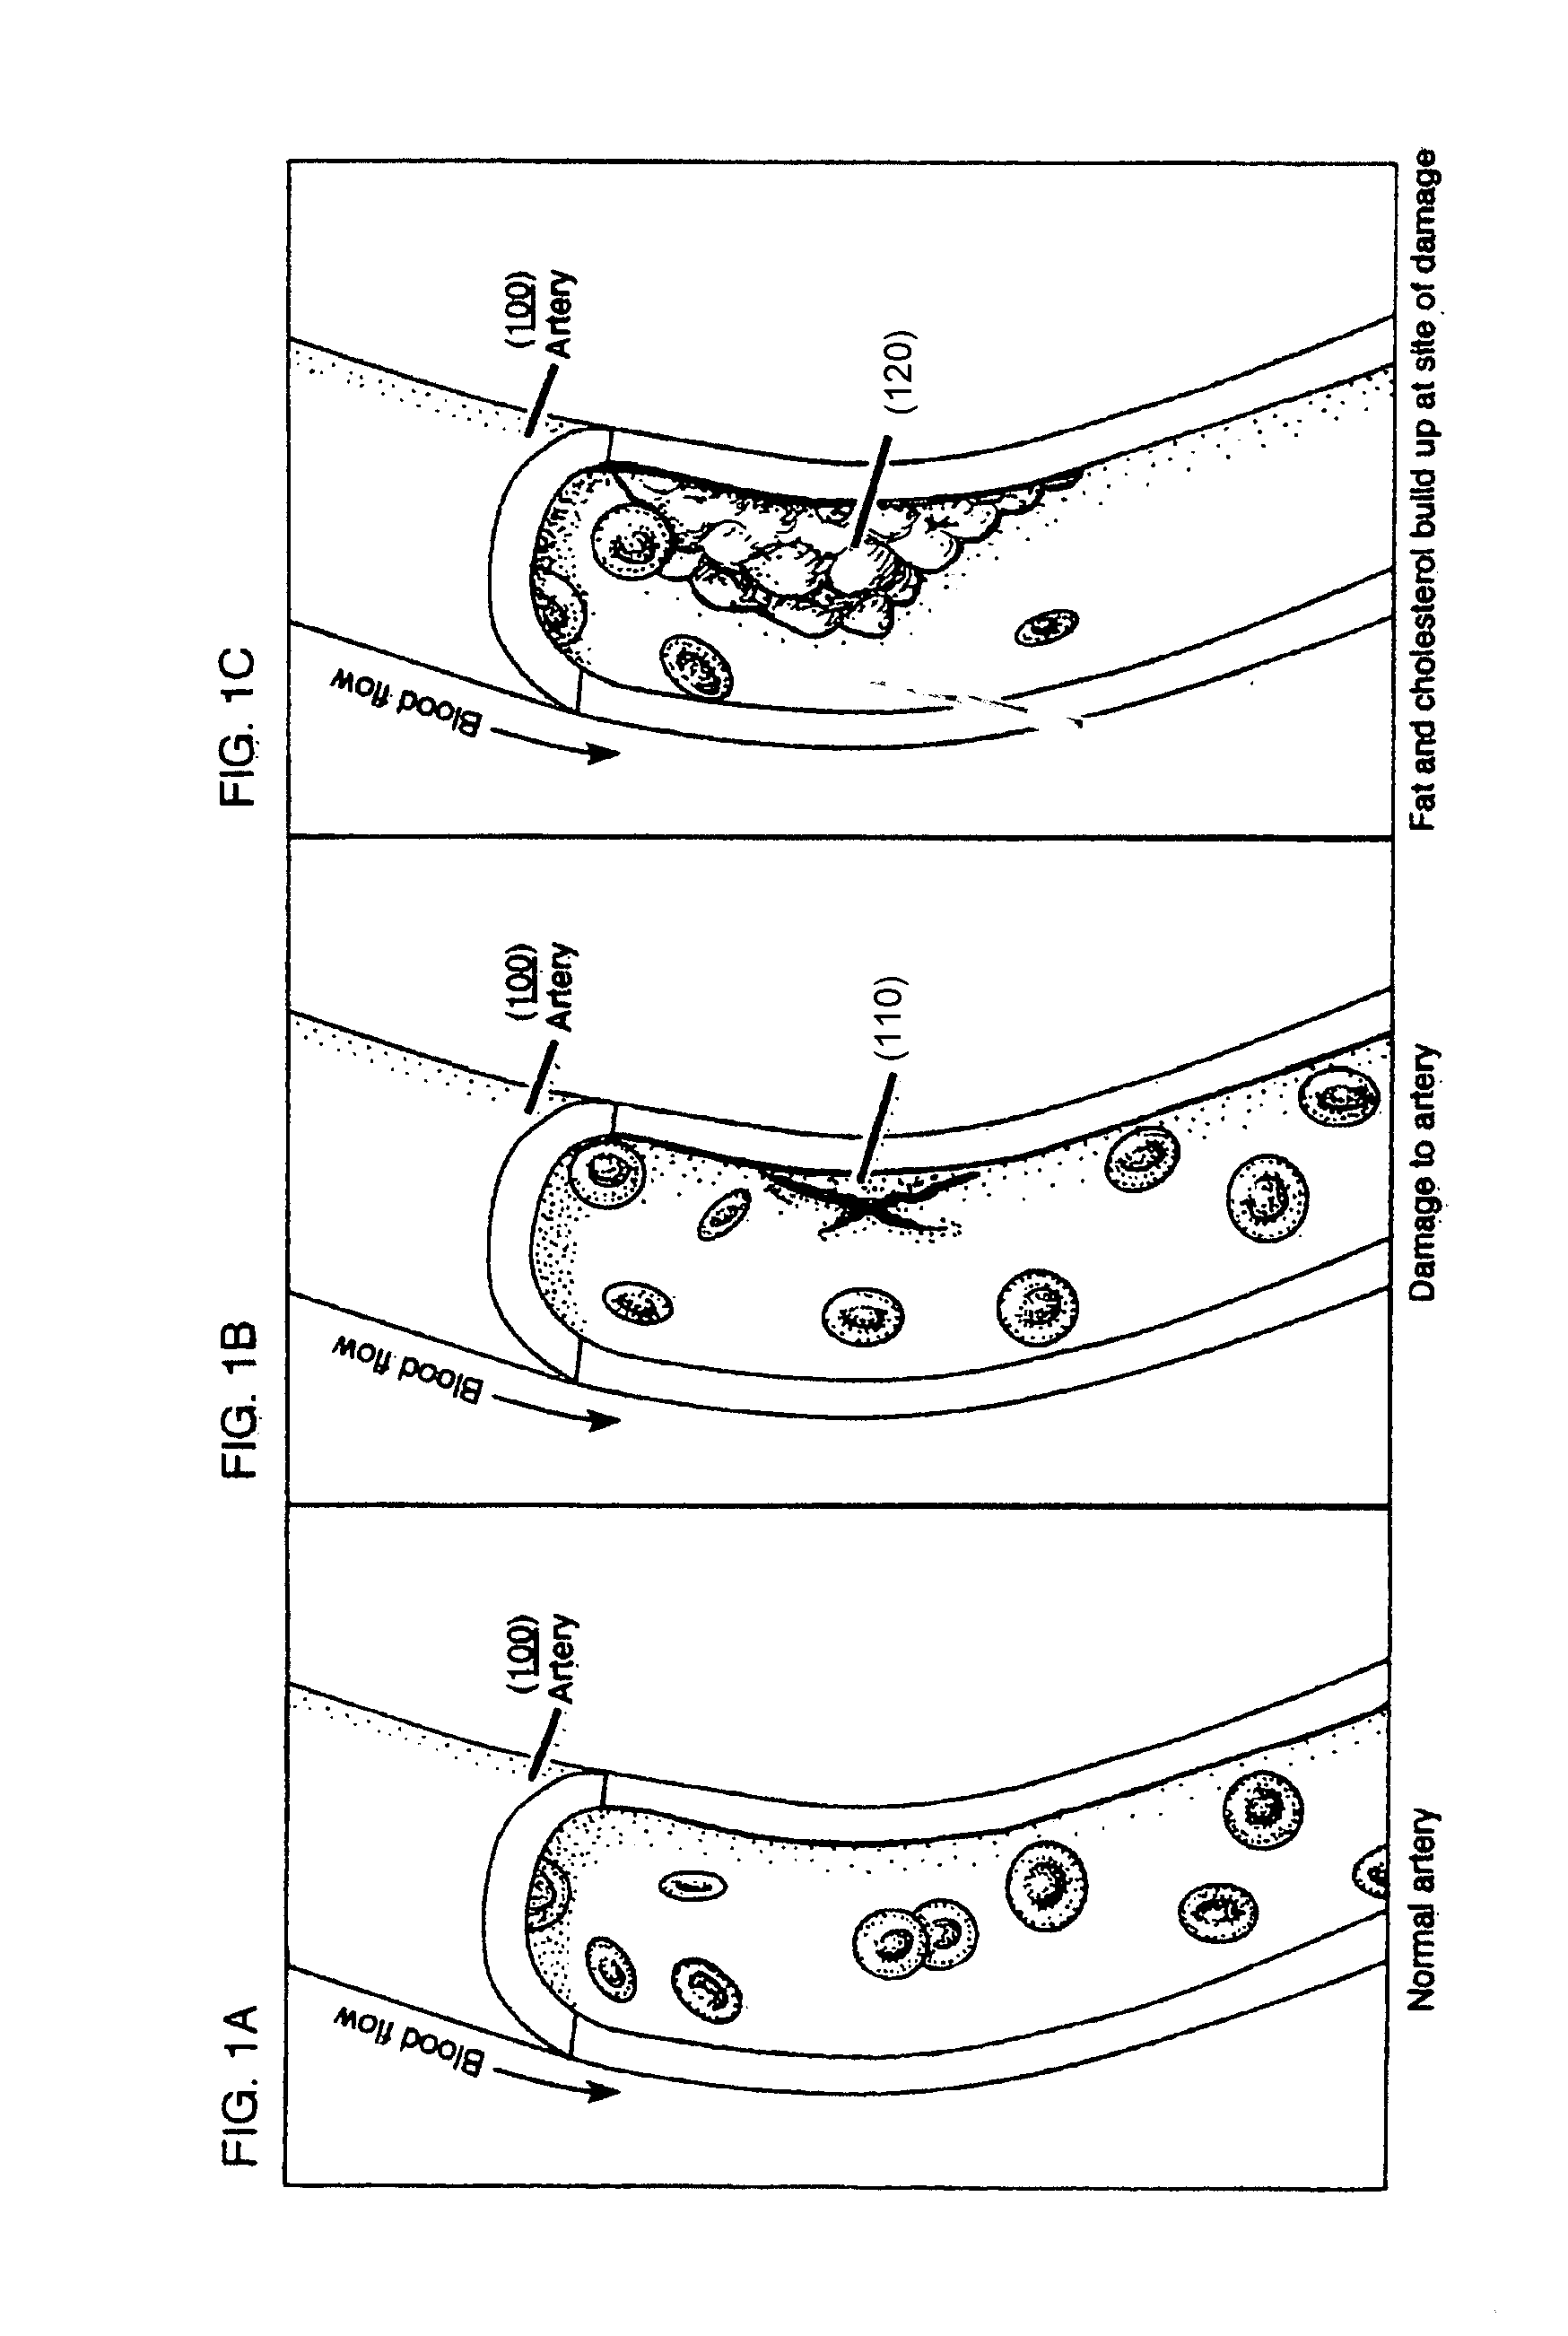 Methods and compositions to treat myocardial conditions